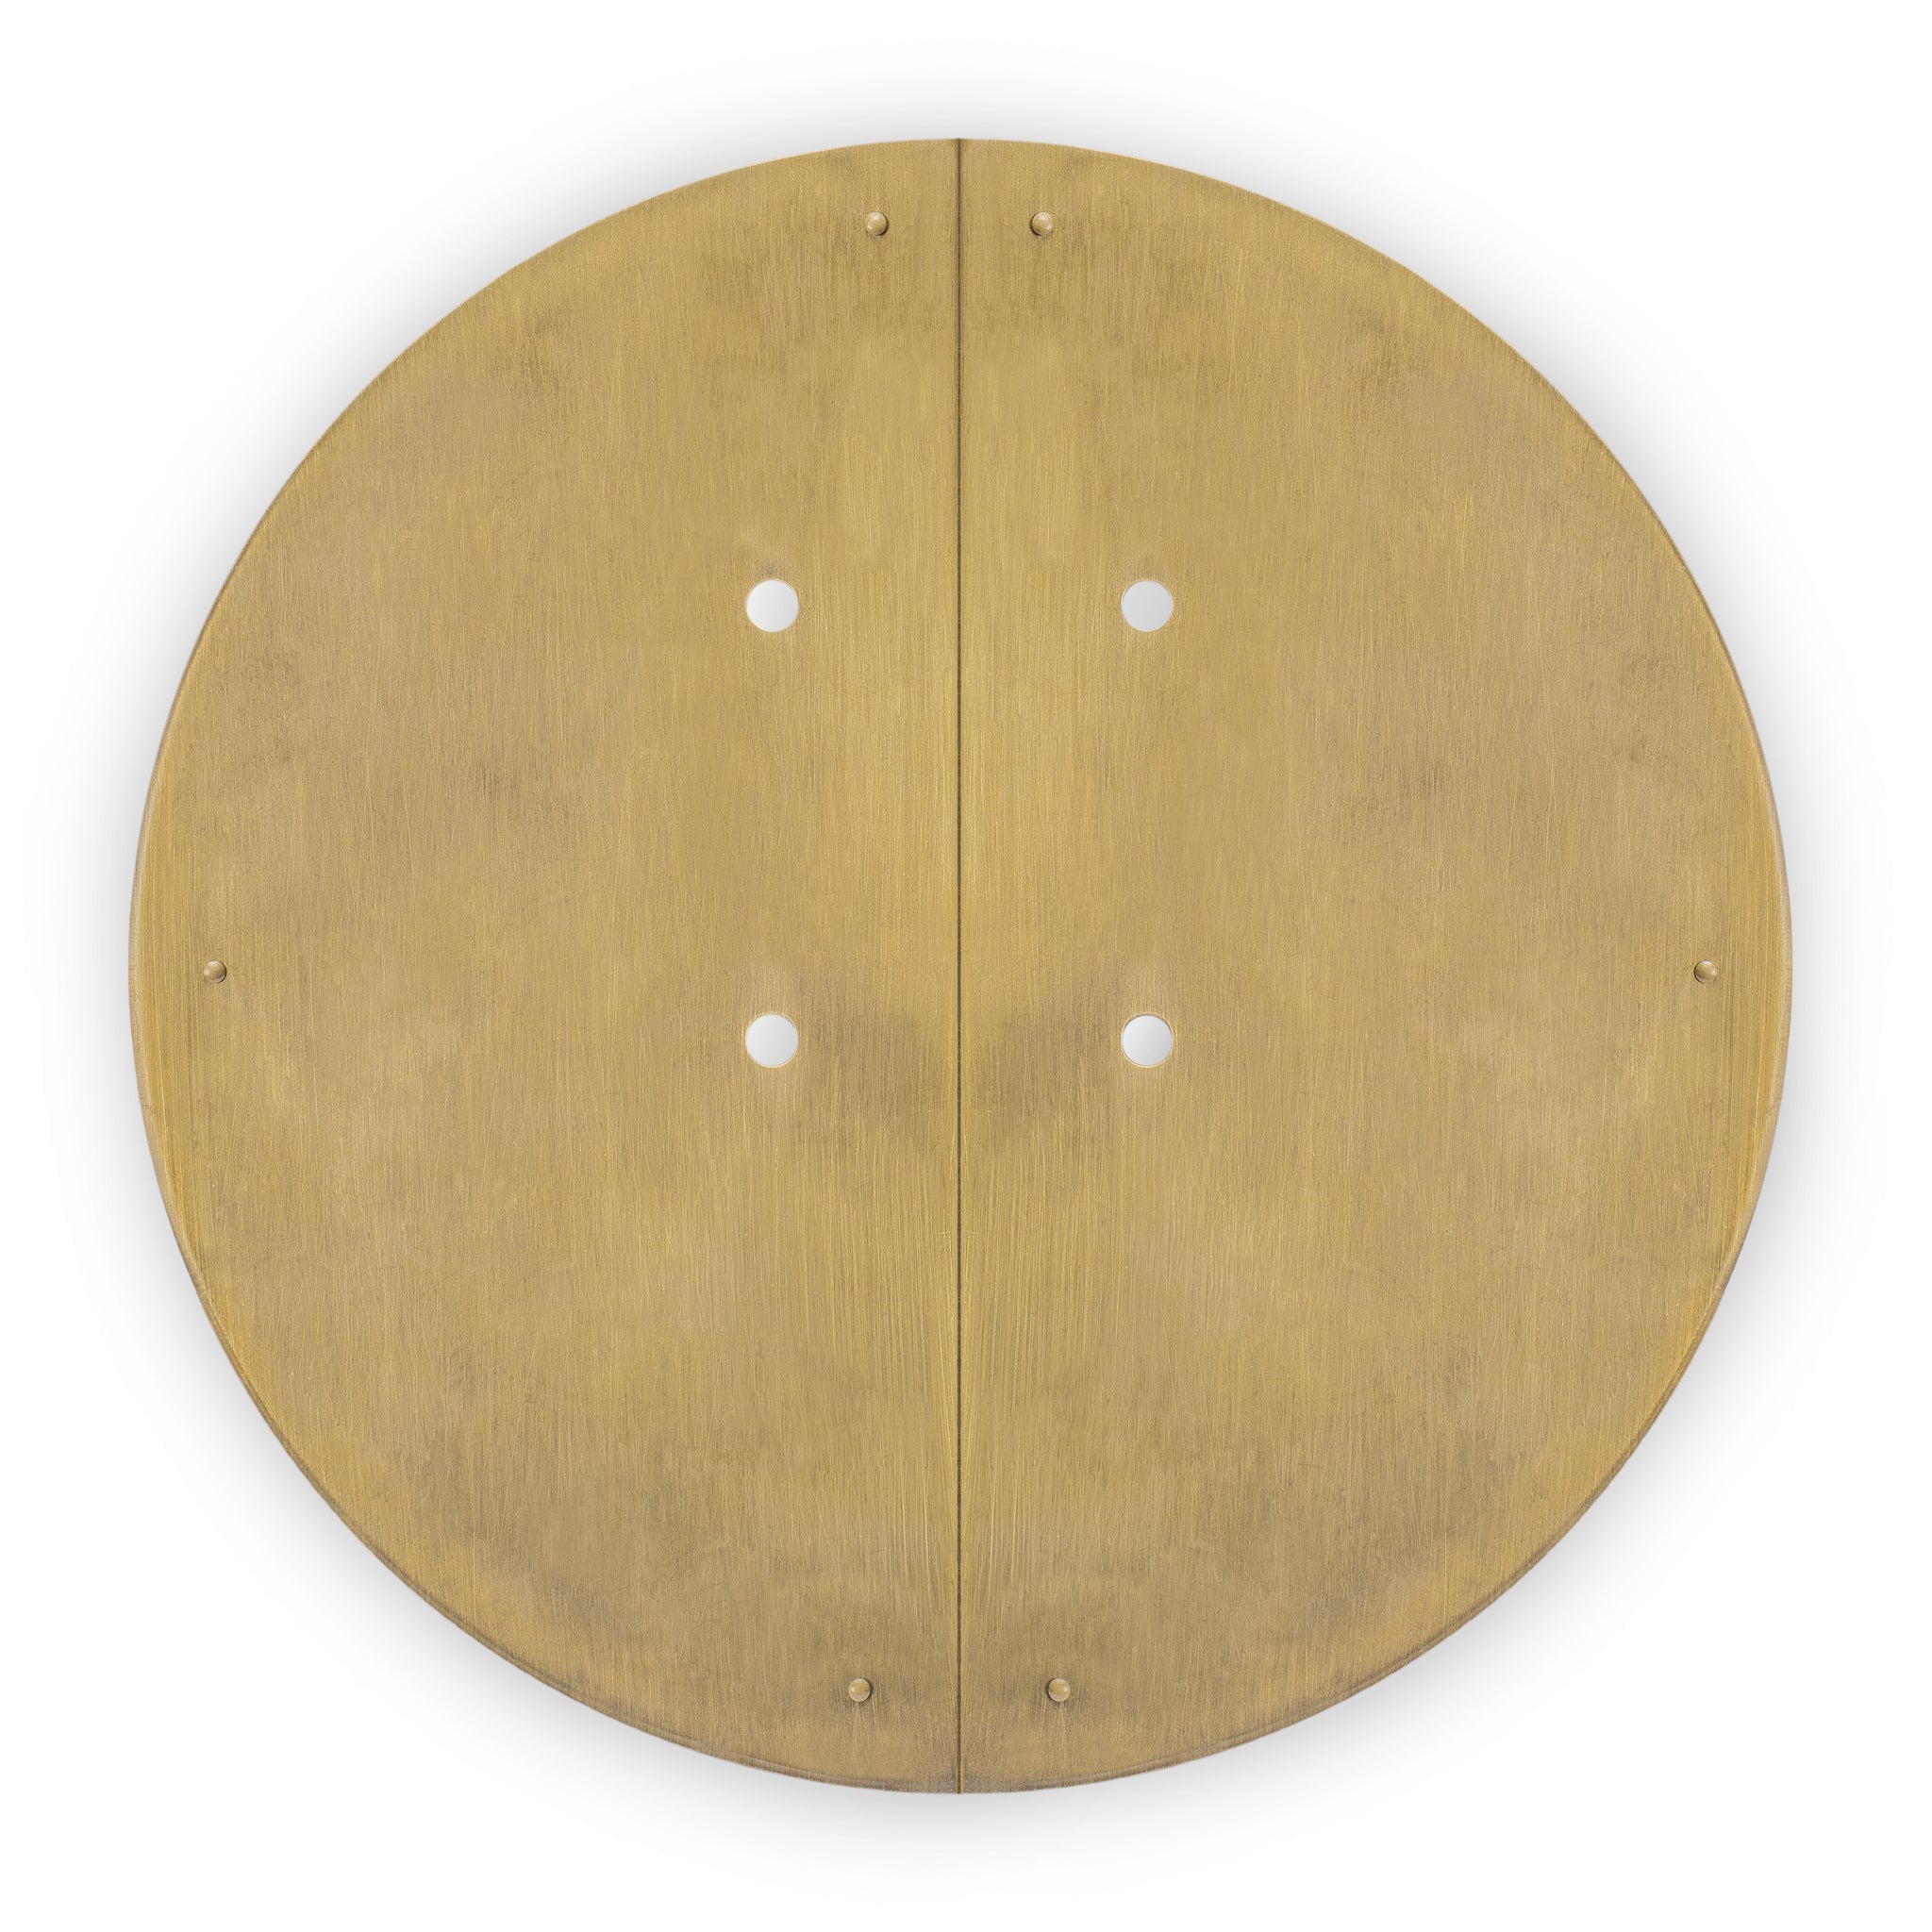 Classic Round Cabinet Face Plate 8.6"-Chinese Brass Hardware